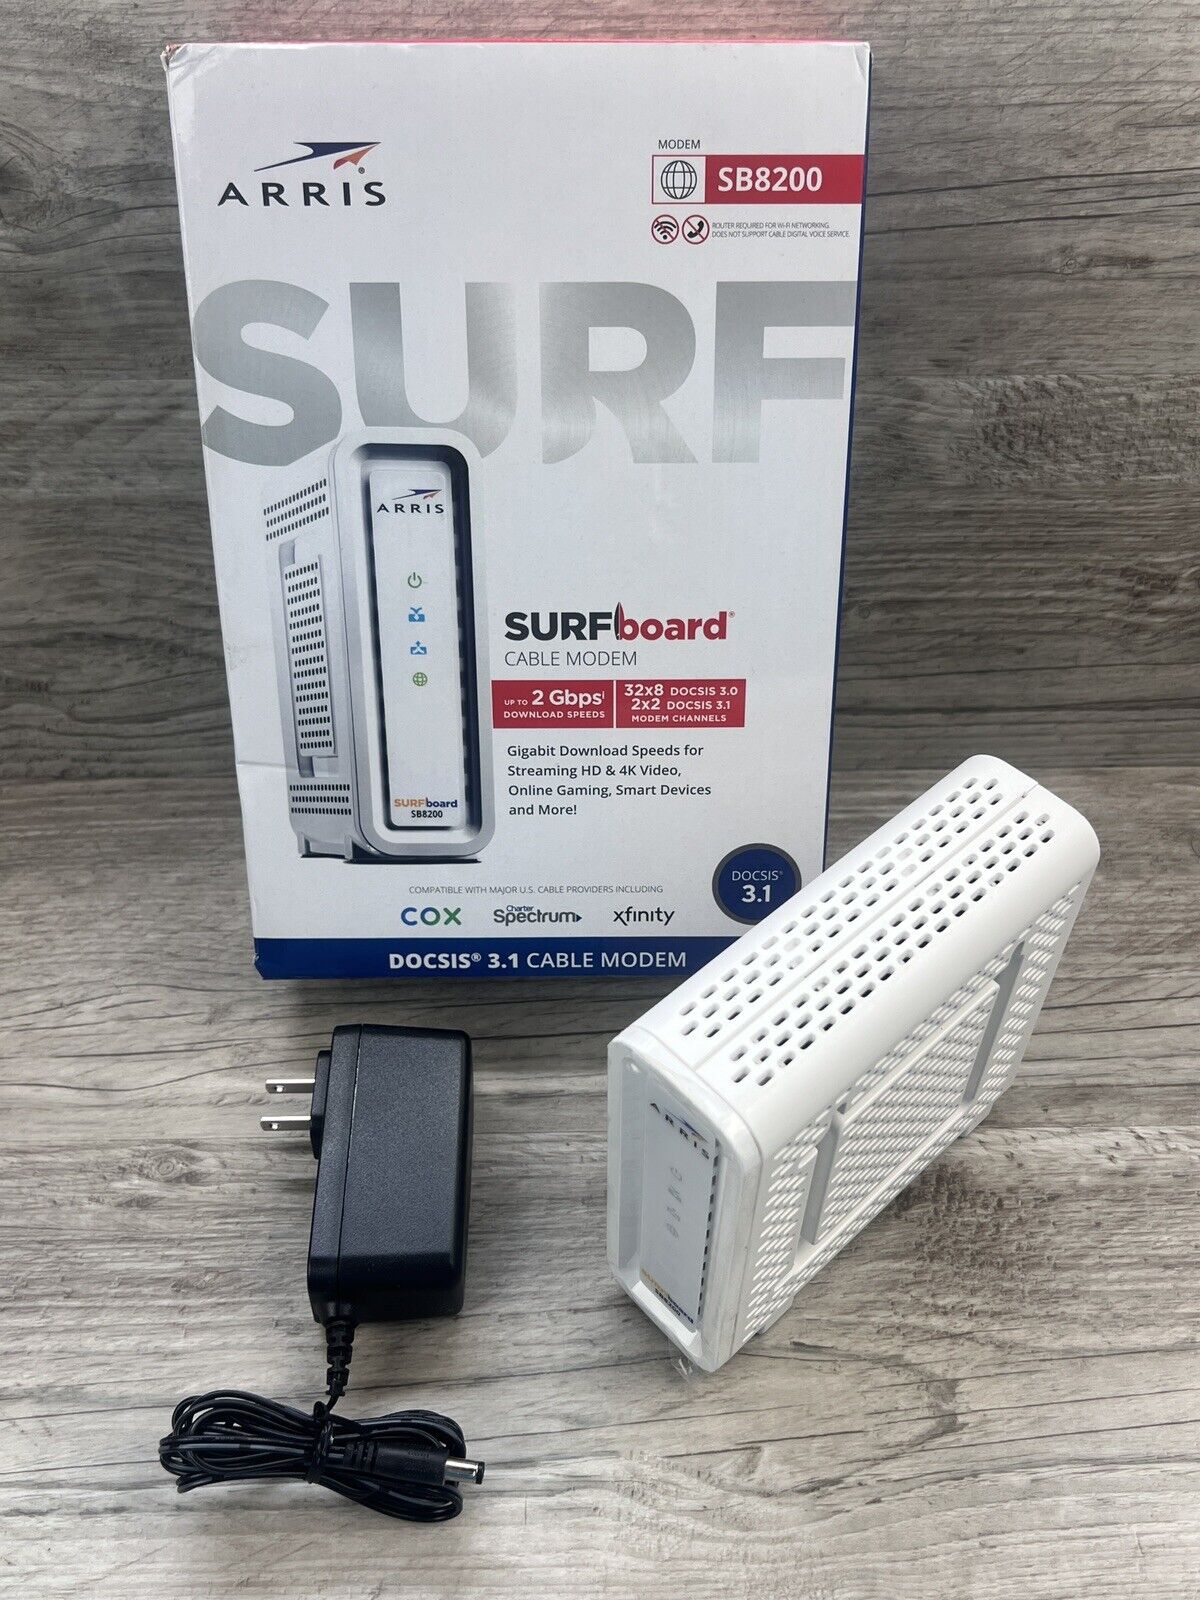  ARRIS SURFboard SB8200 DOCSIS 3.1 10 Gbps Cable Modem New Open Box